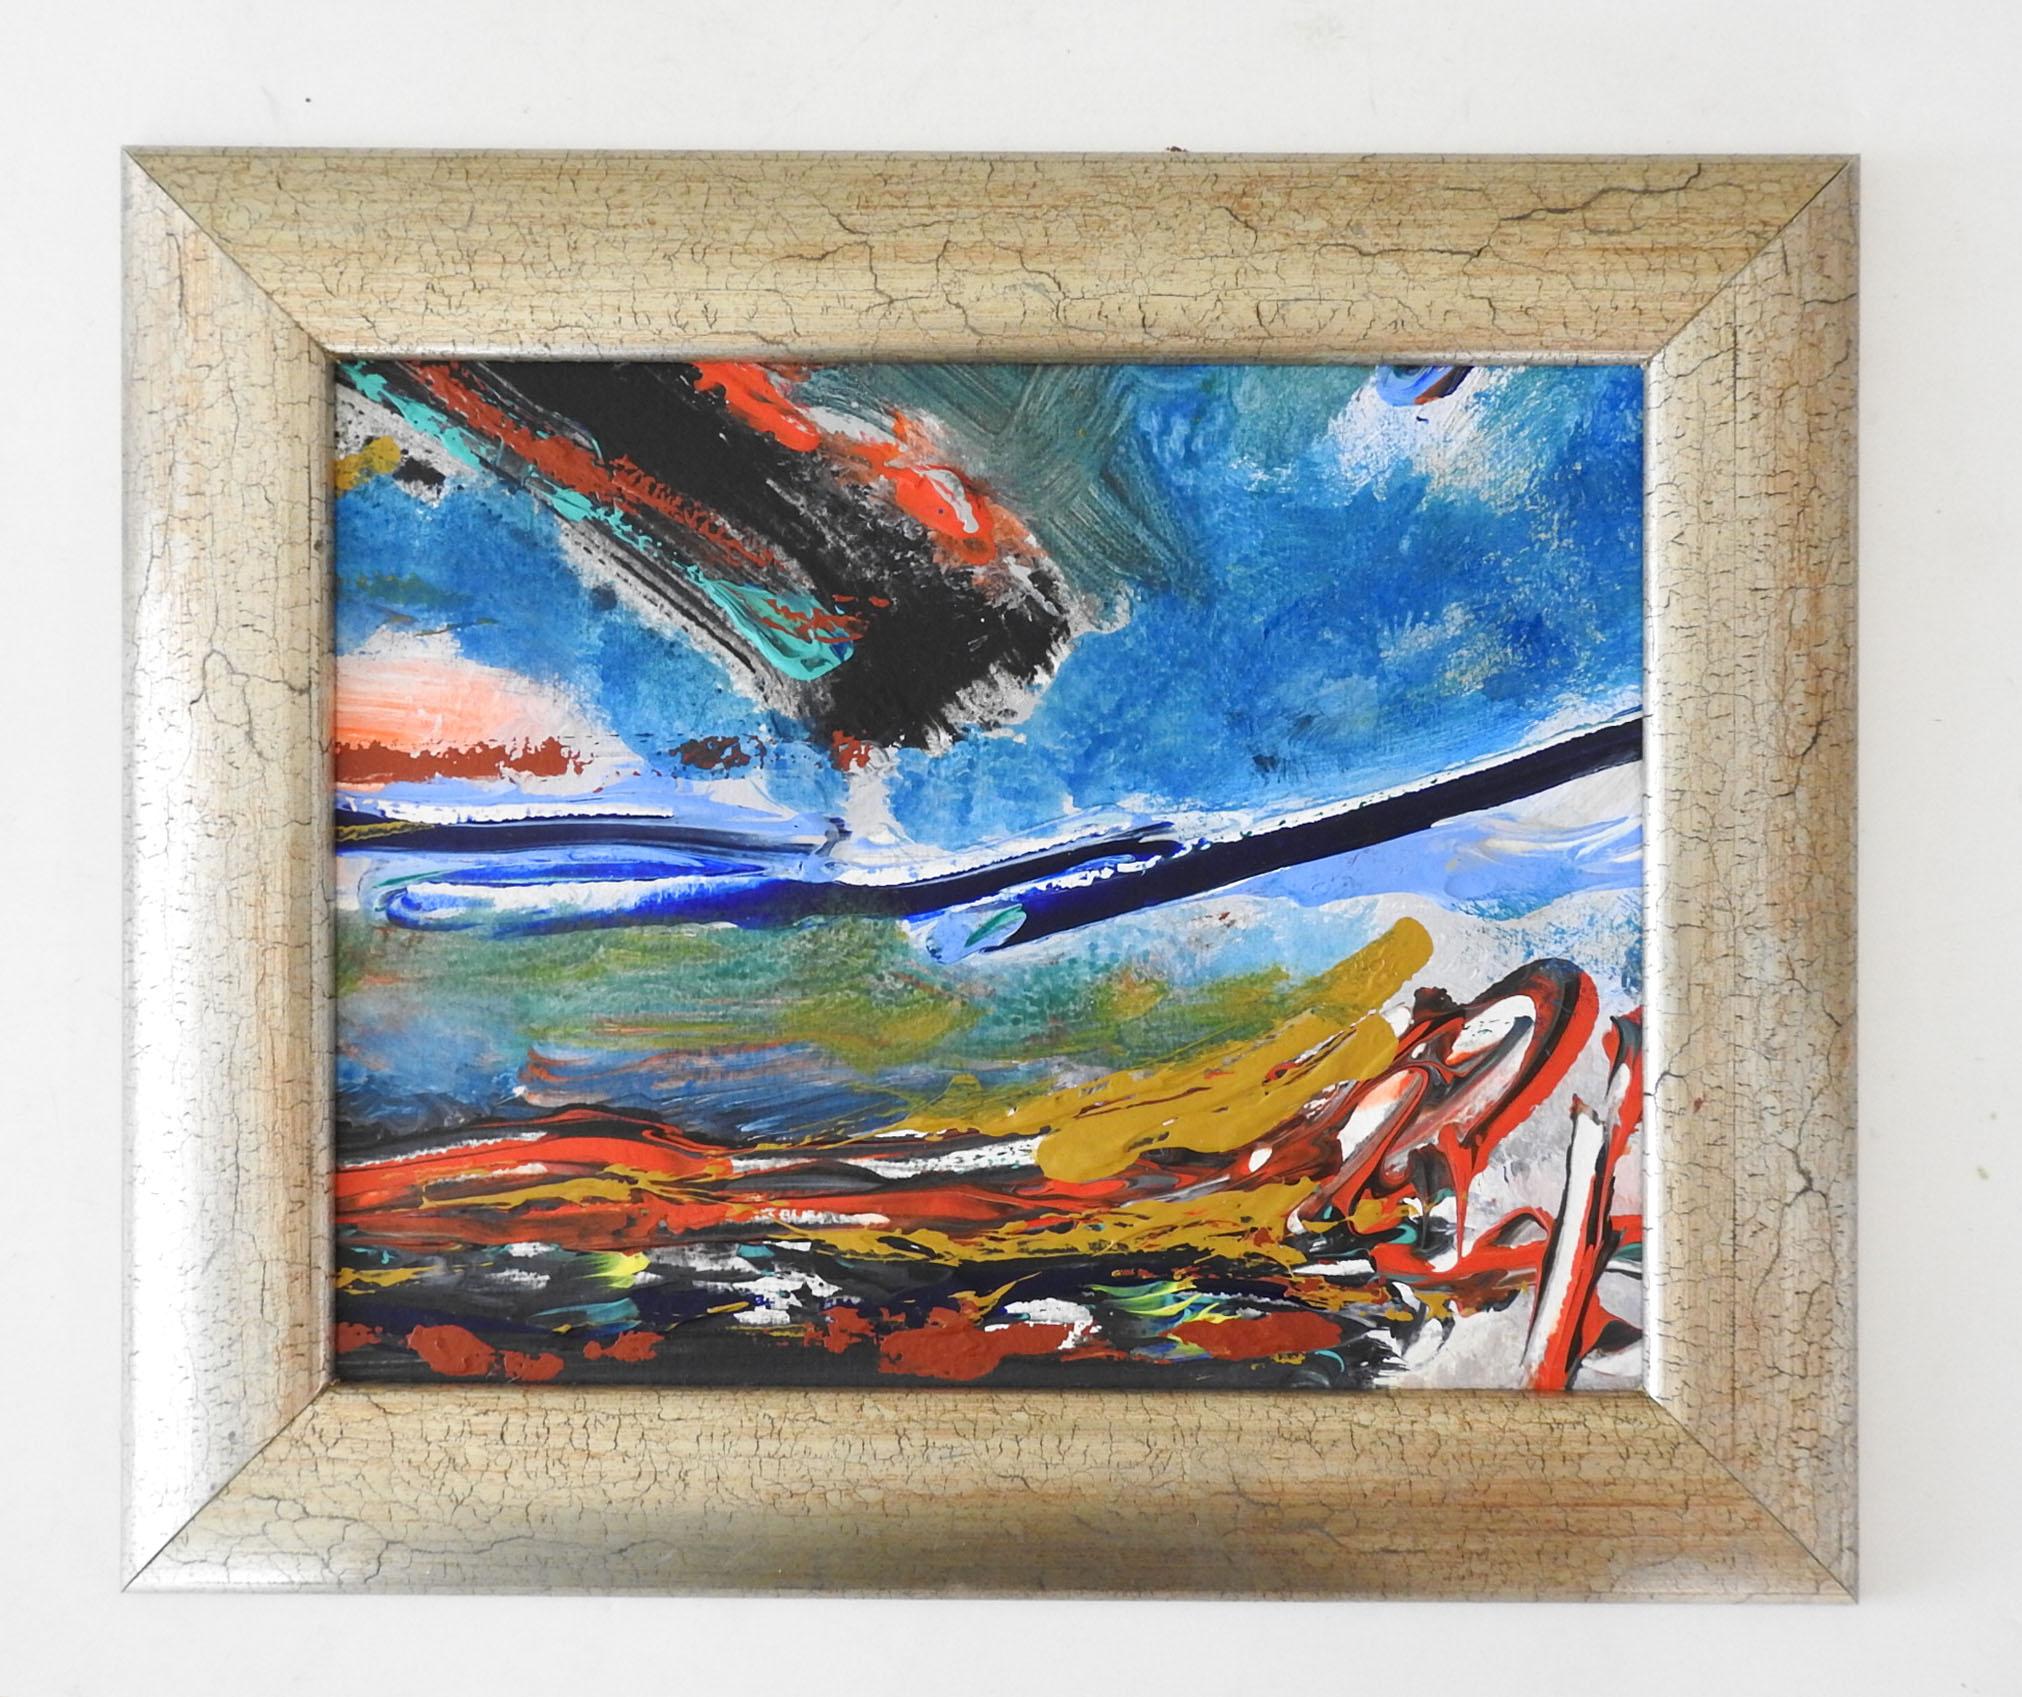 Late 20th century acrylic on paper abstract expressionist painting in blue, ochre and red. Unsigned. Displayed in champagne crackle finish wood frame, scuffing to frame.